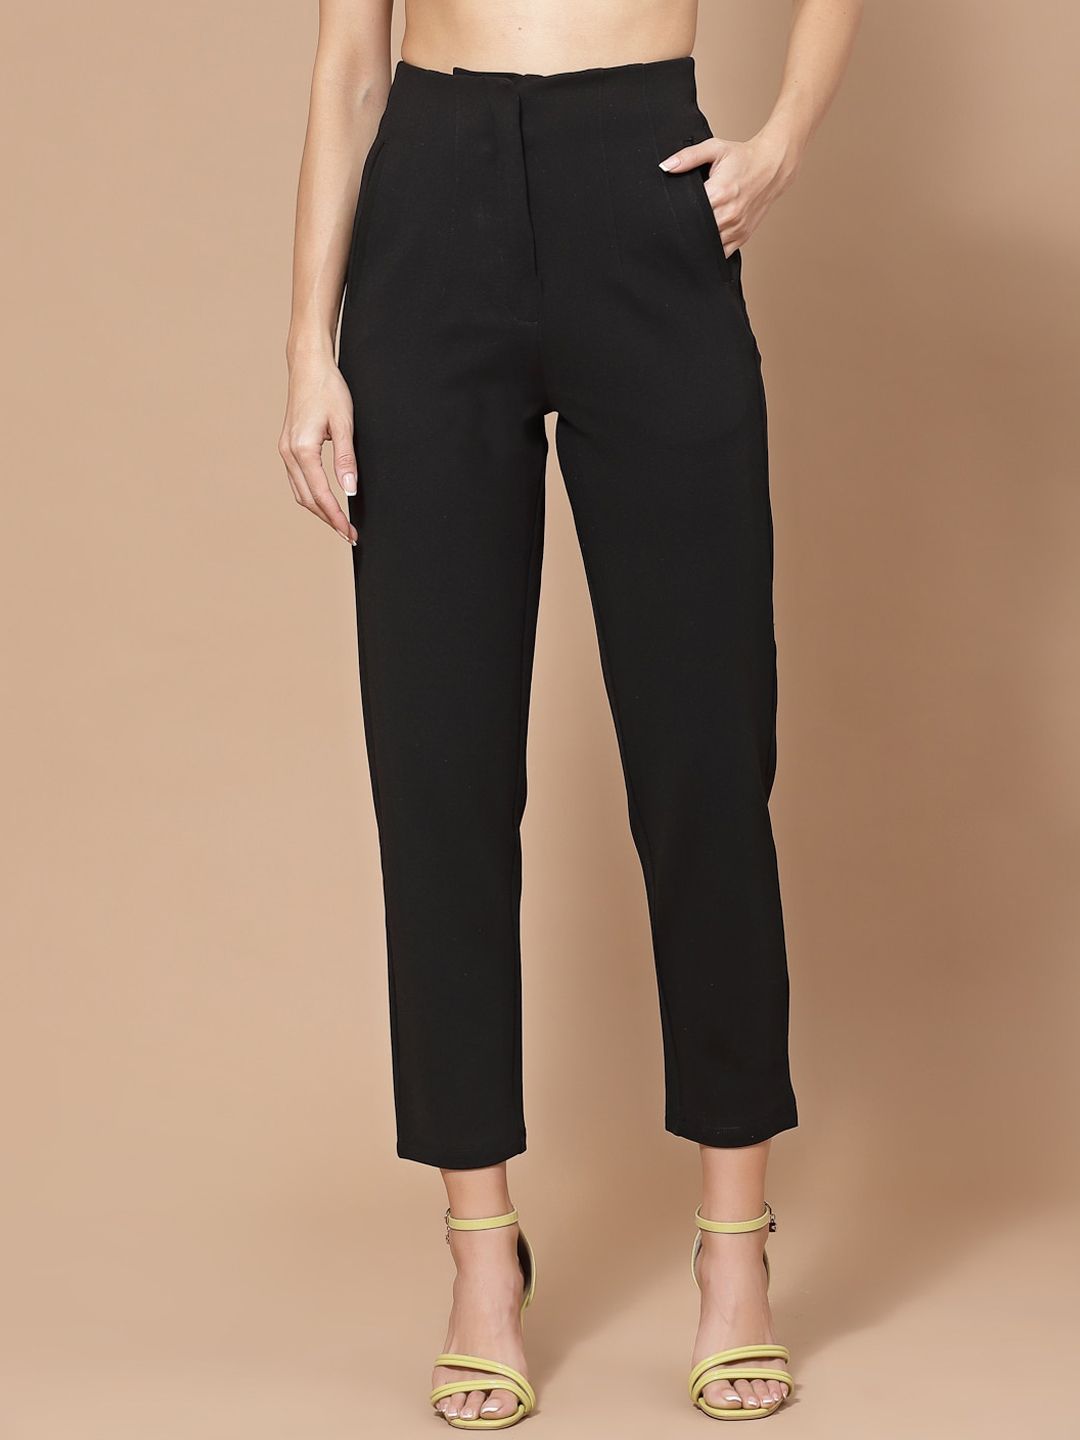 KASSUALLY Women High-Rise Cigarette Trousers Price in India